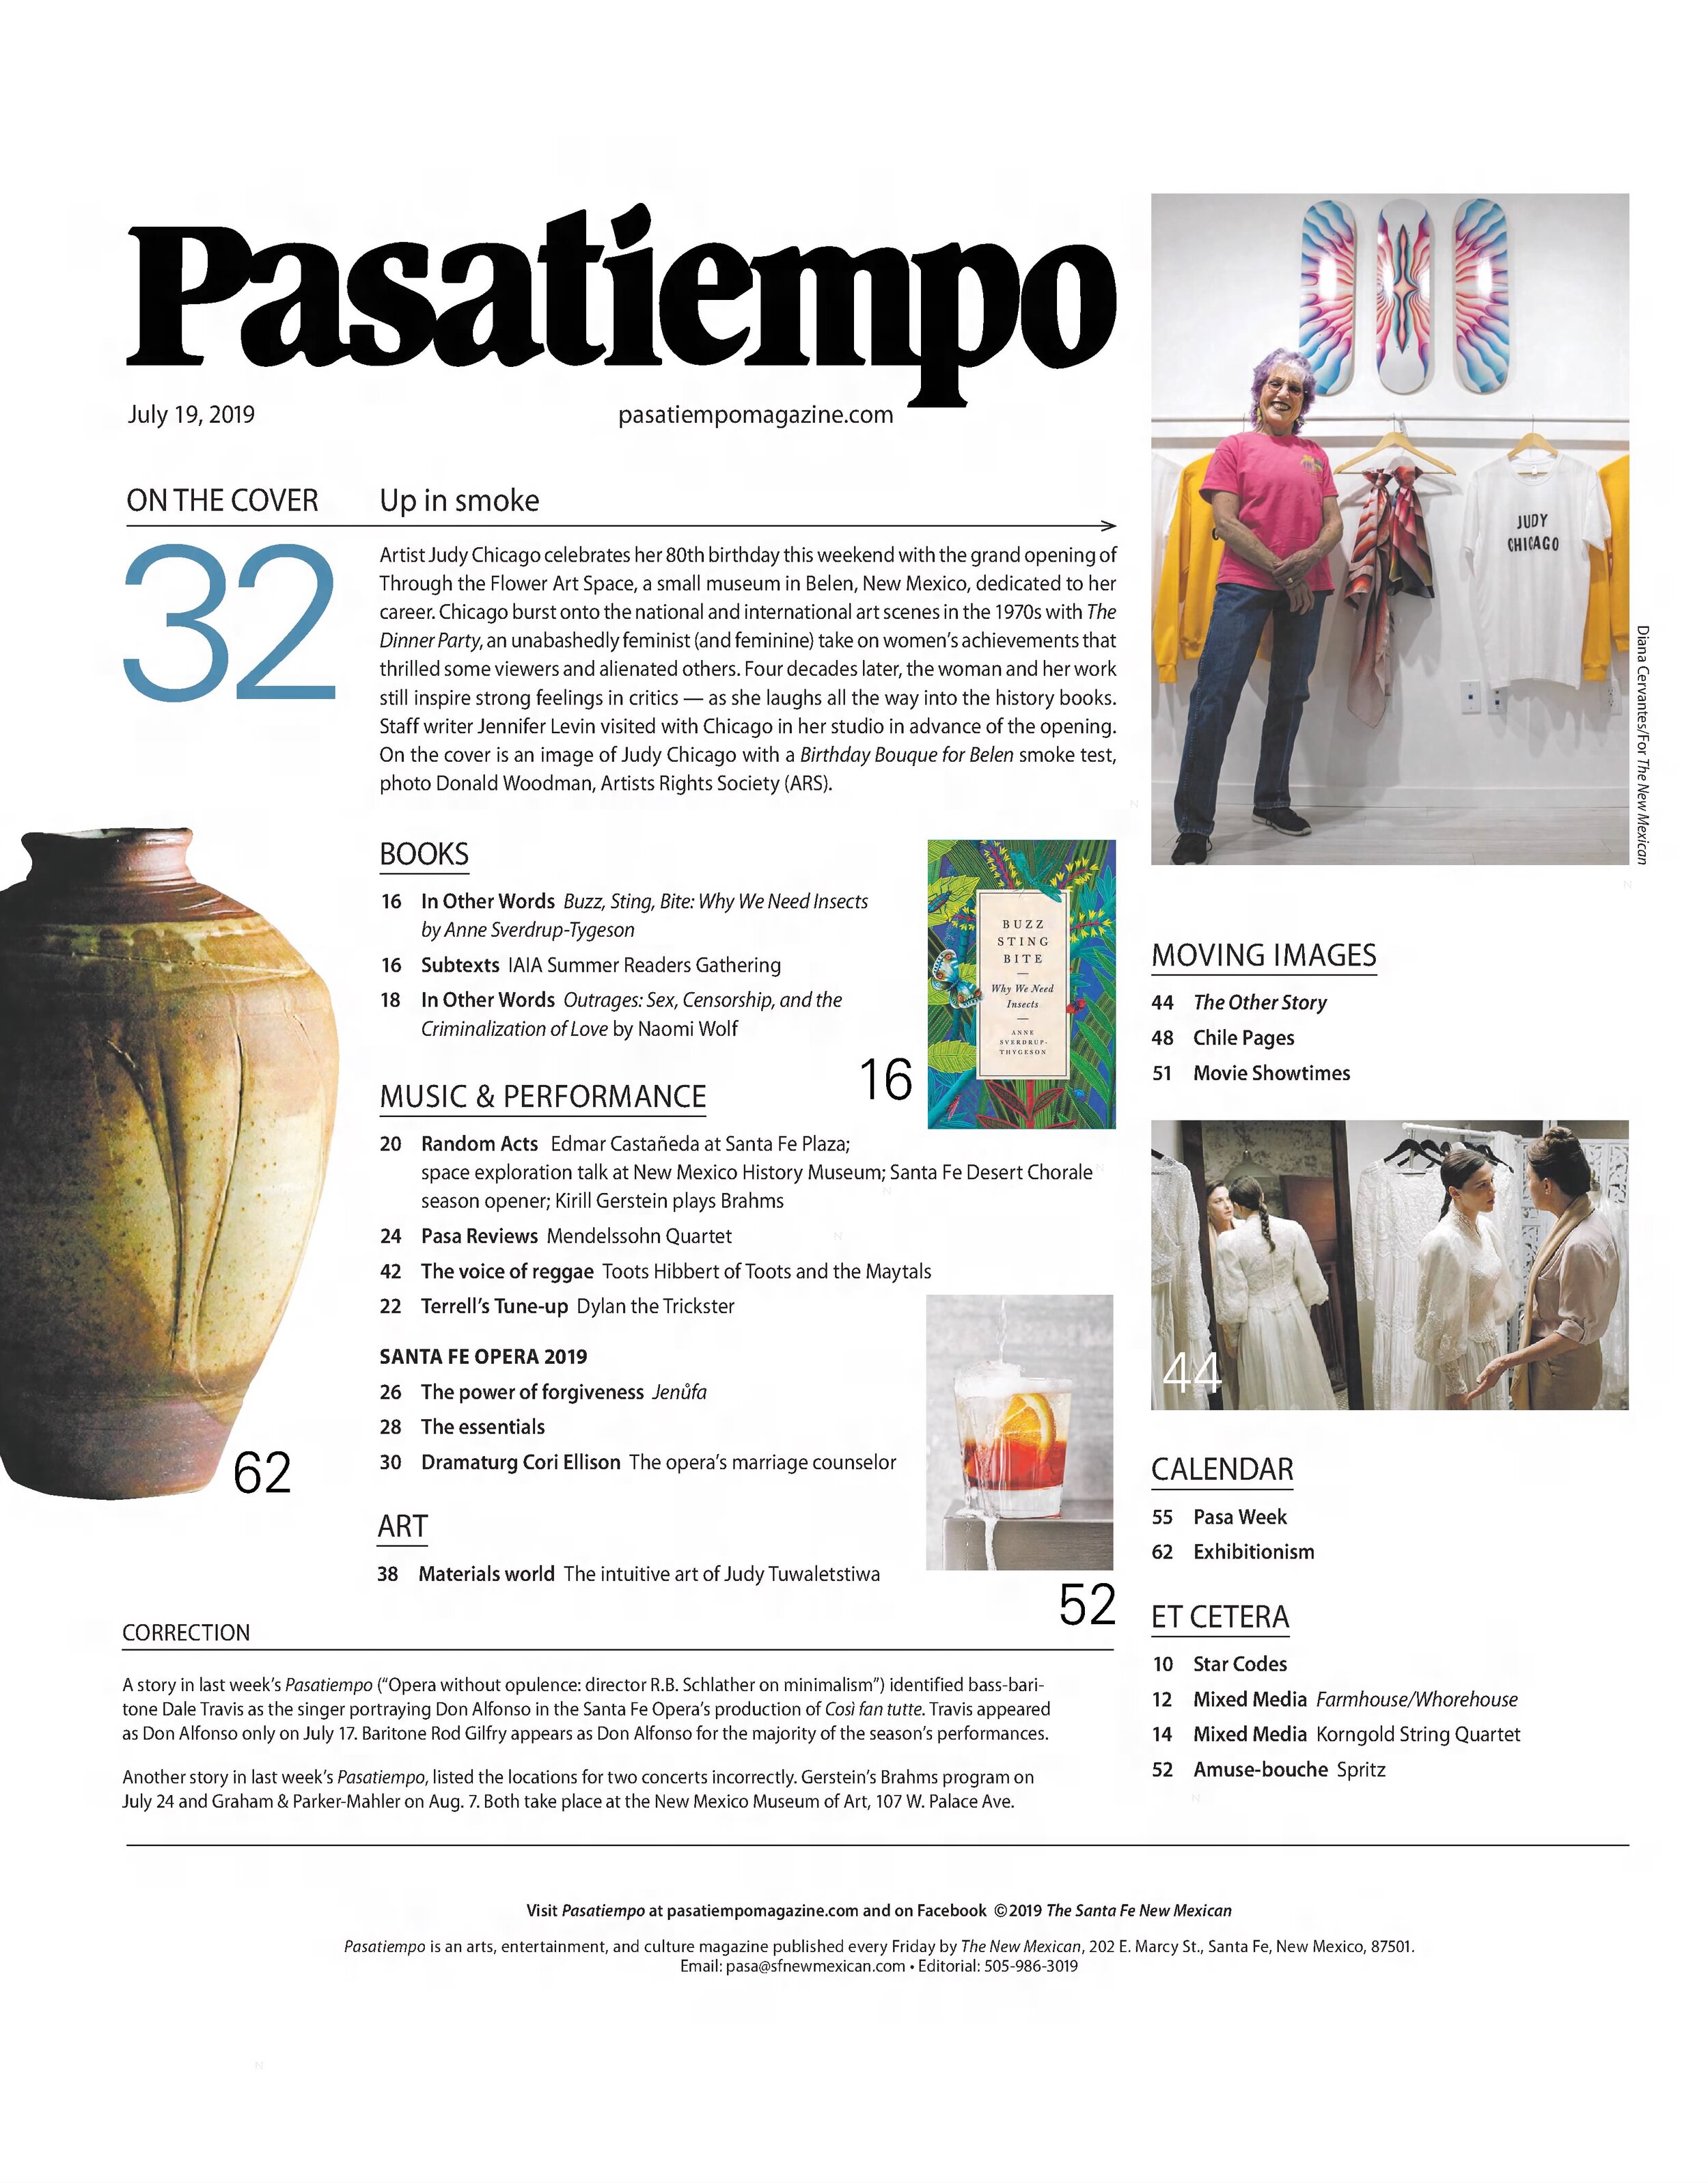  Clips of Judy Chicago Feature for  Pasatiempo Magazine   